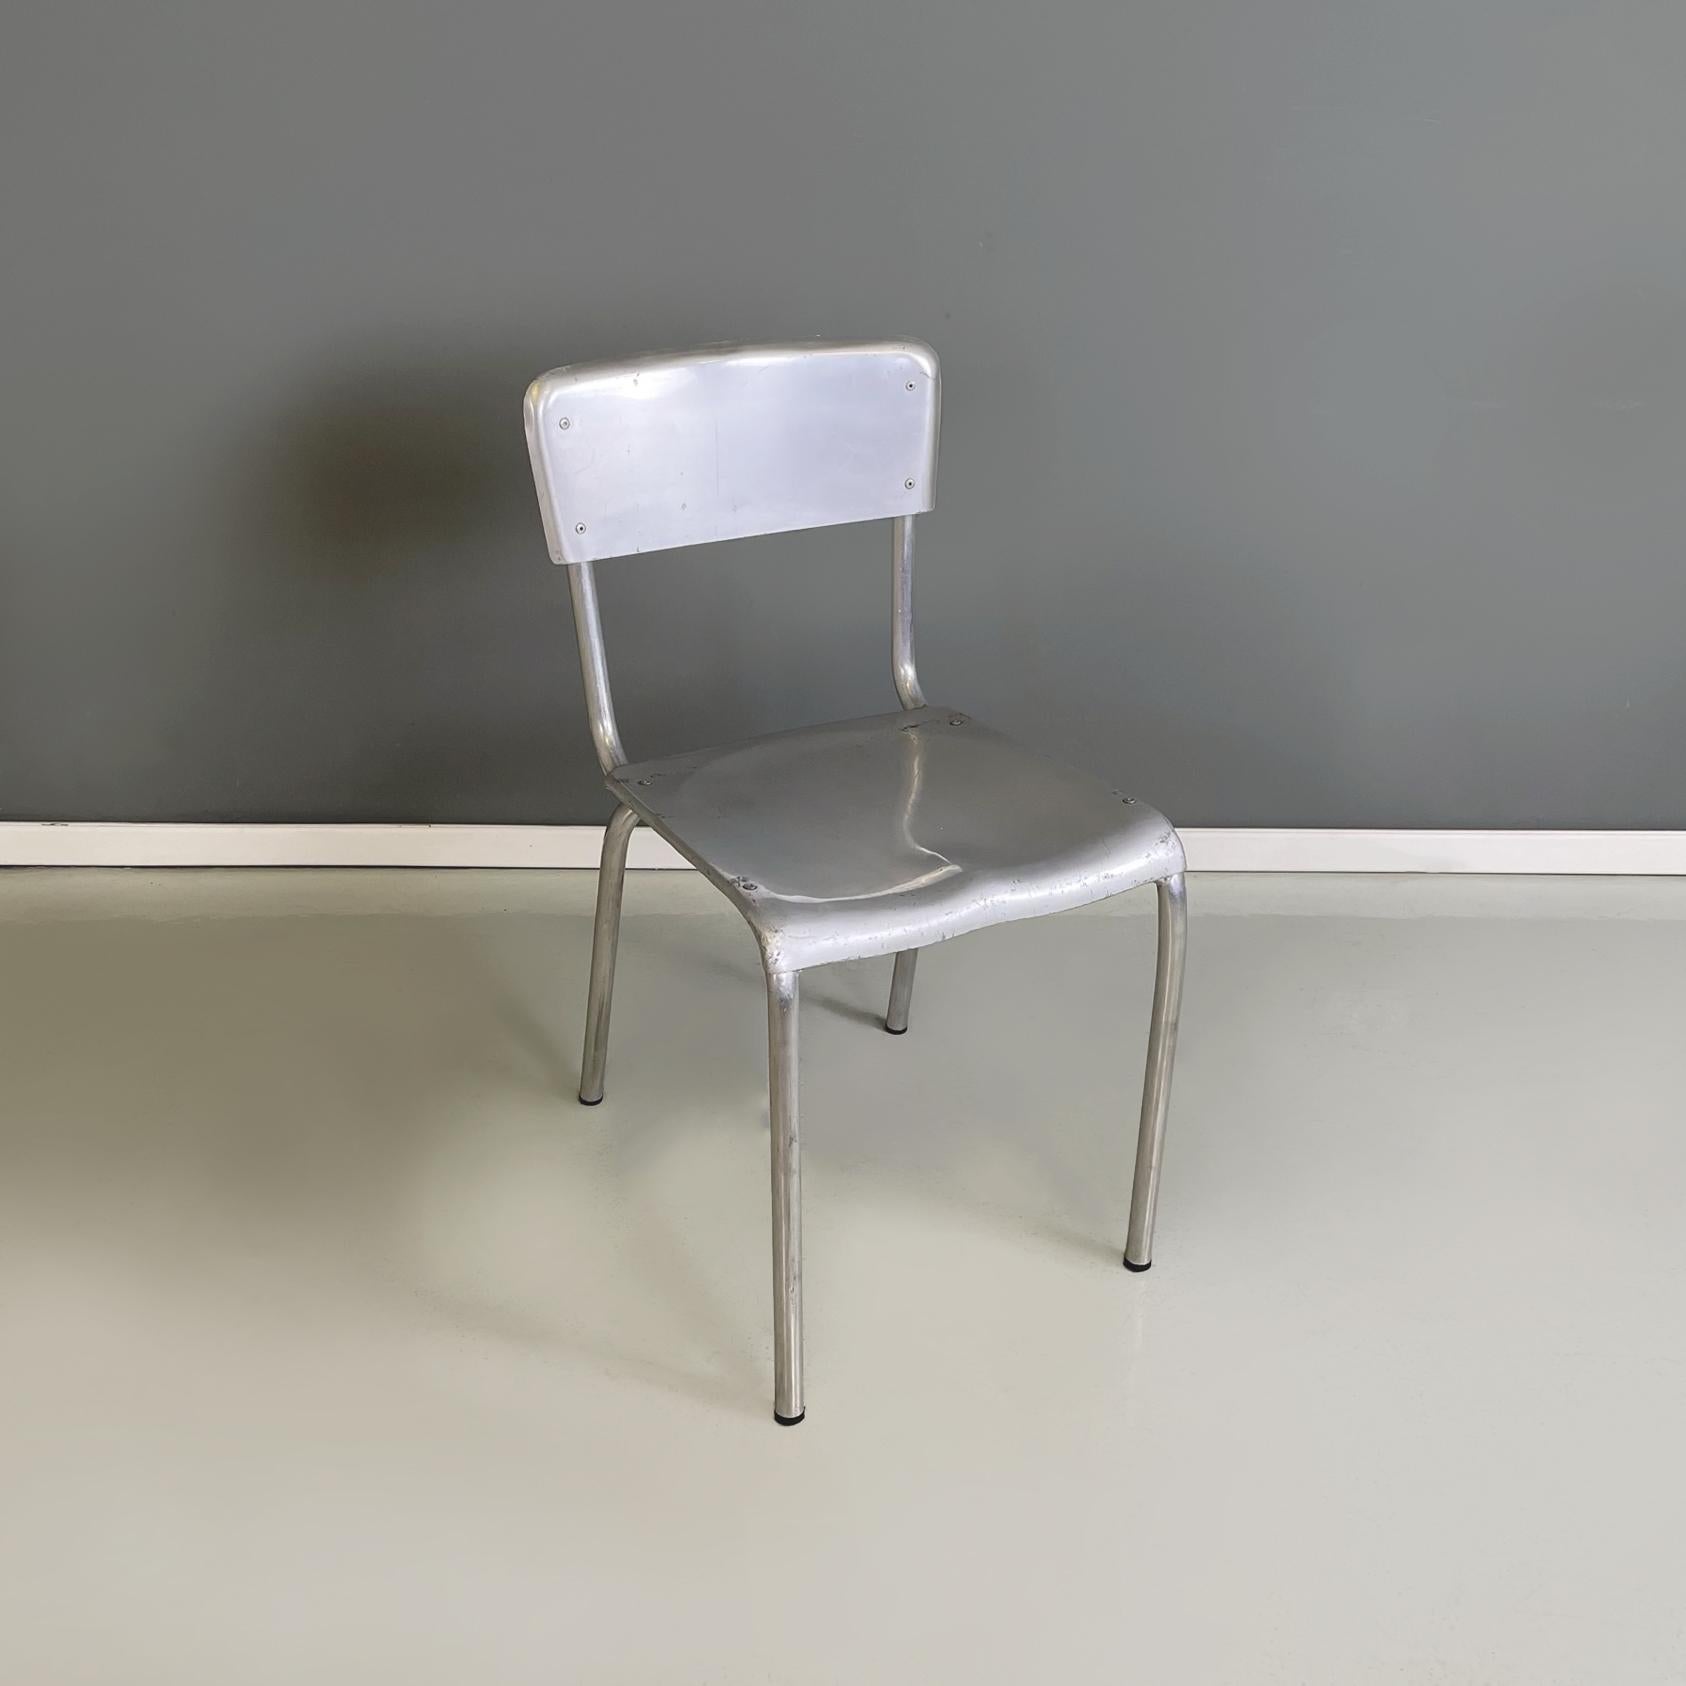 Italian modern rectangular stackable aluminium chairs, 1980s
Set of 28 stackable chairs entirely in aluminium. The chair has a rectangular seat, shaped with a slight recess. The backrest is also rectangular. The legs, also in aluminium, have a round